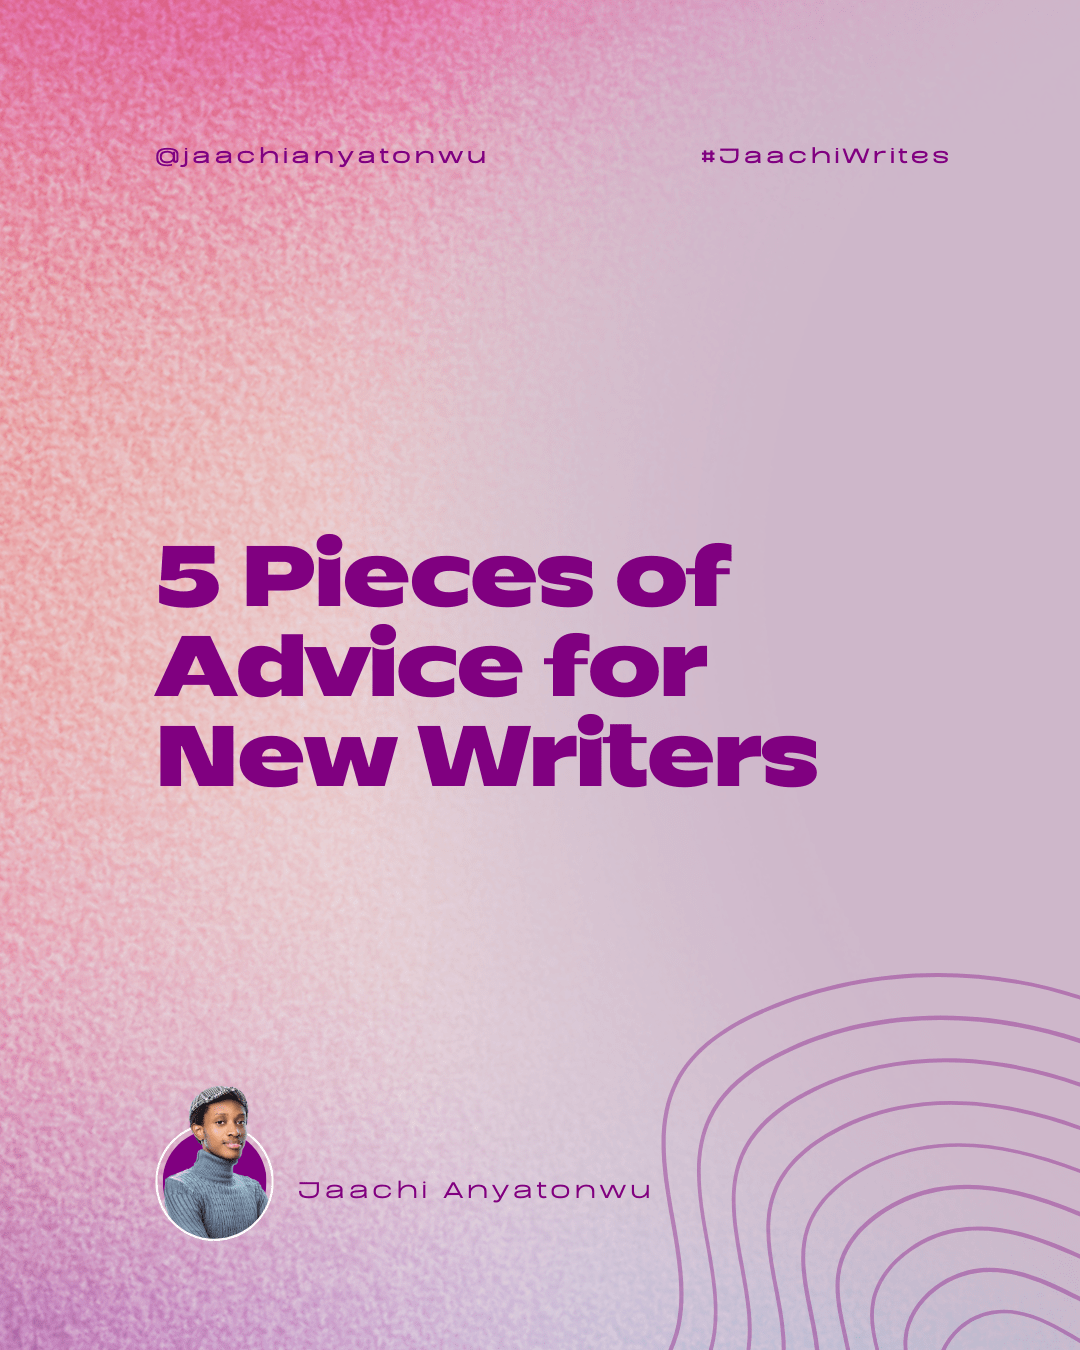 5 Pieces of Advice for New Writers